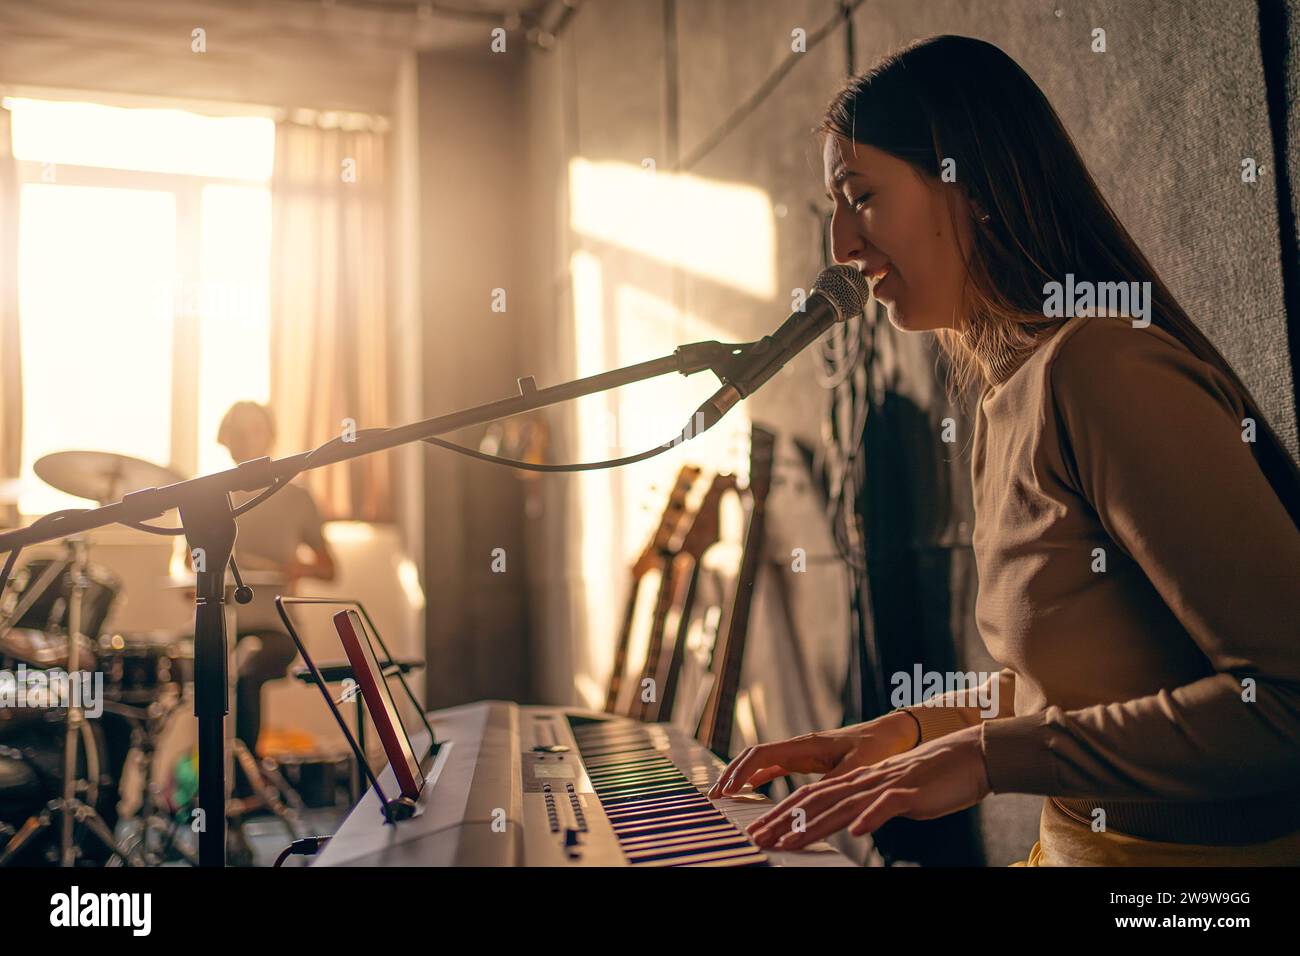 Girl singer plays synthesizer and sings into microphone in music studio. Music band rehearsal. Stock Photo